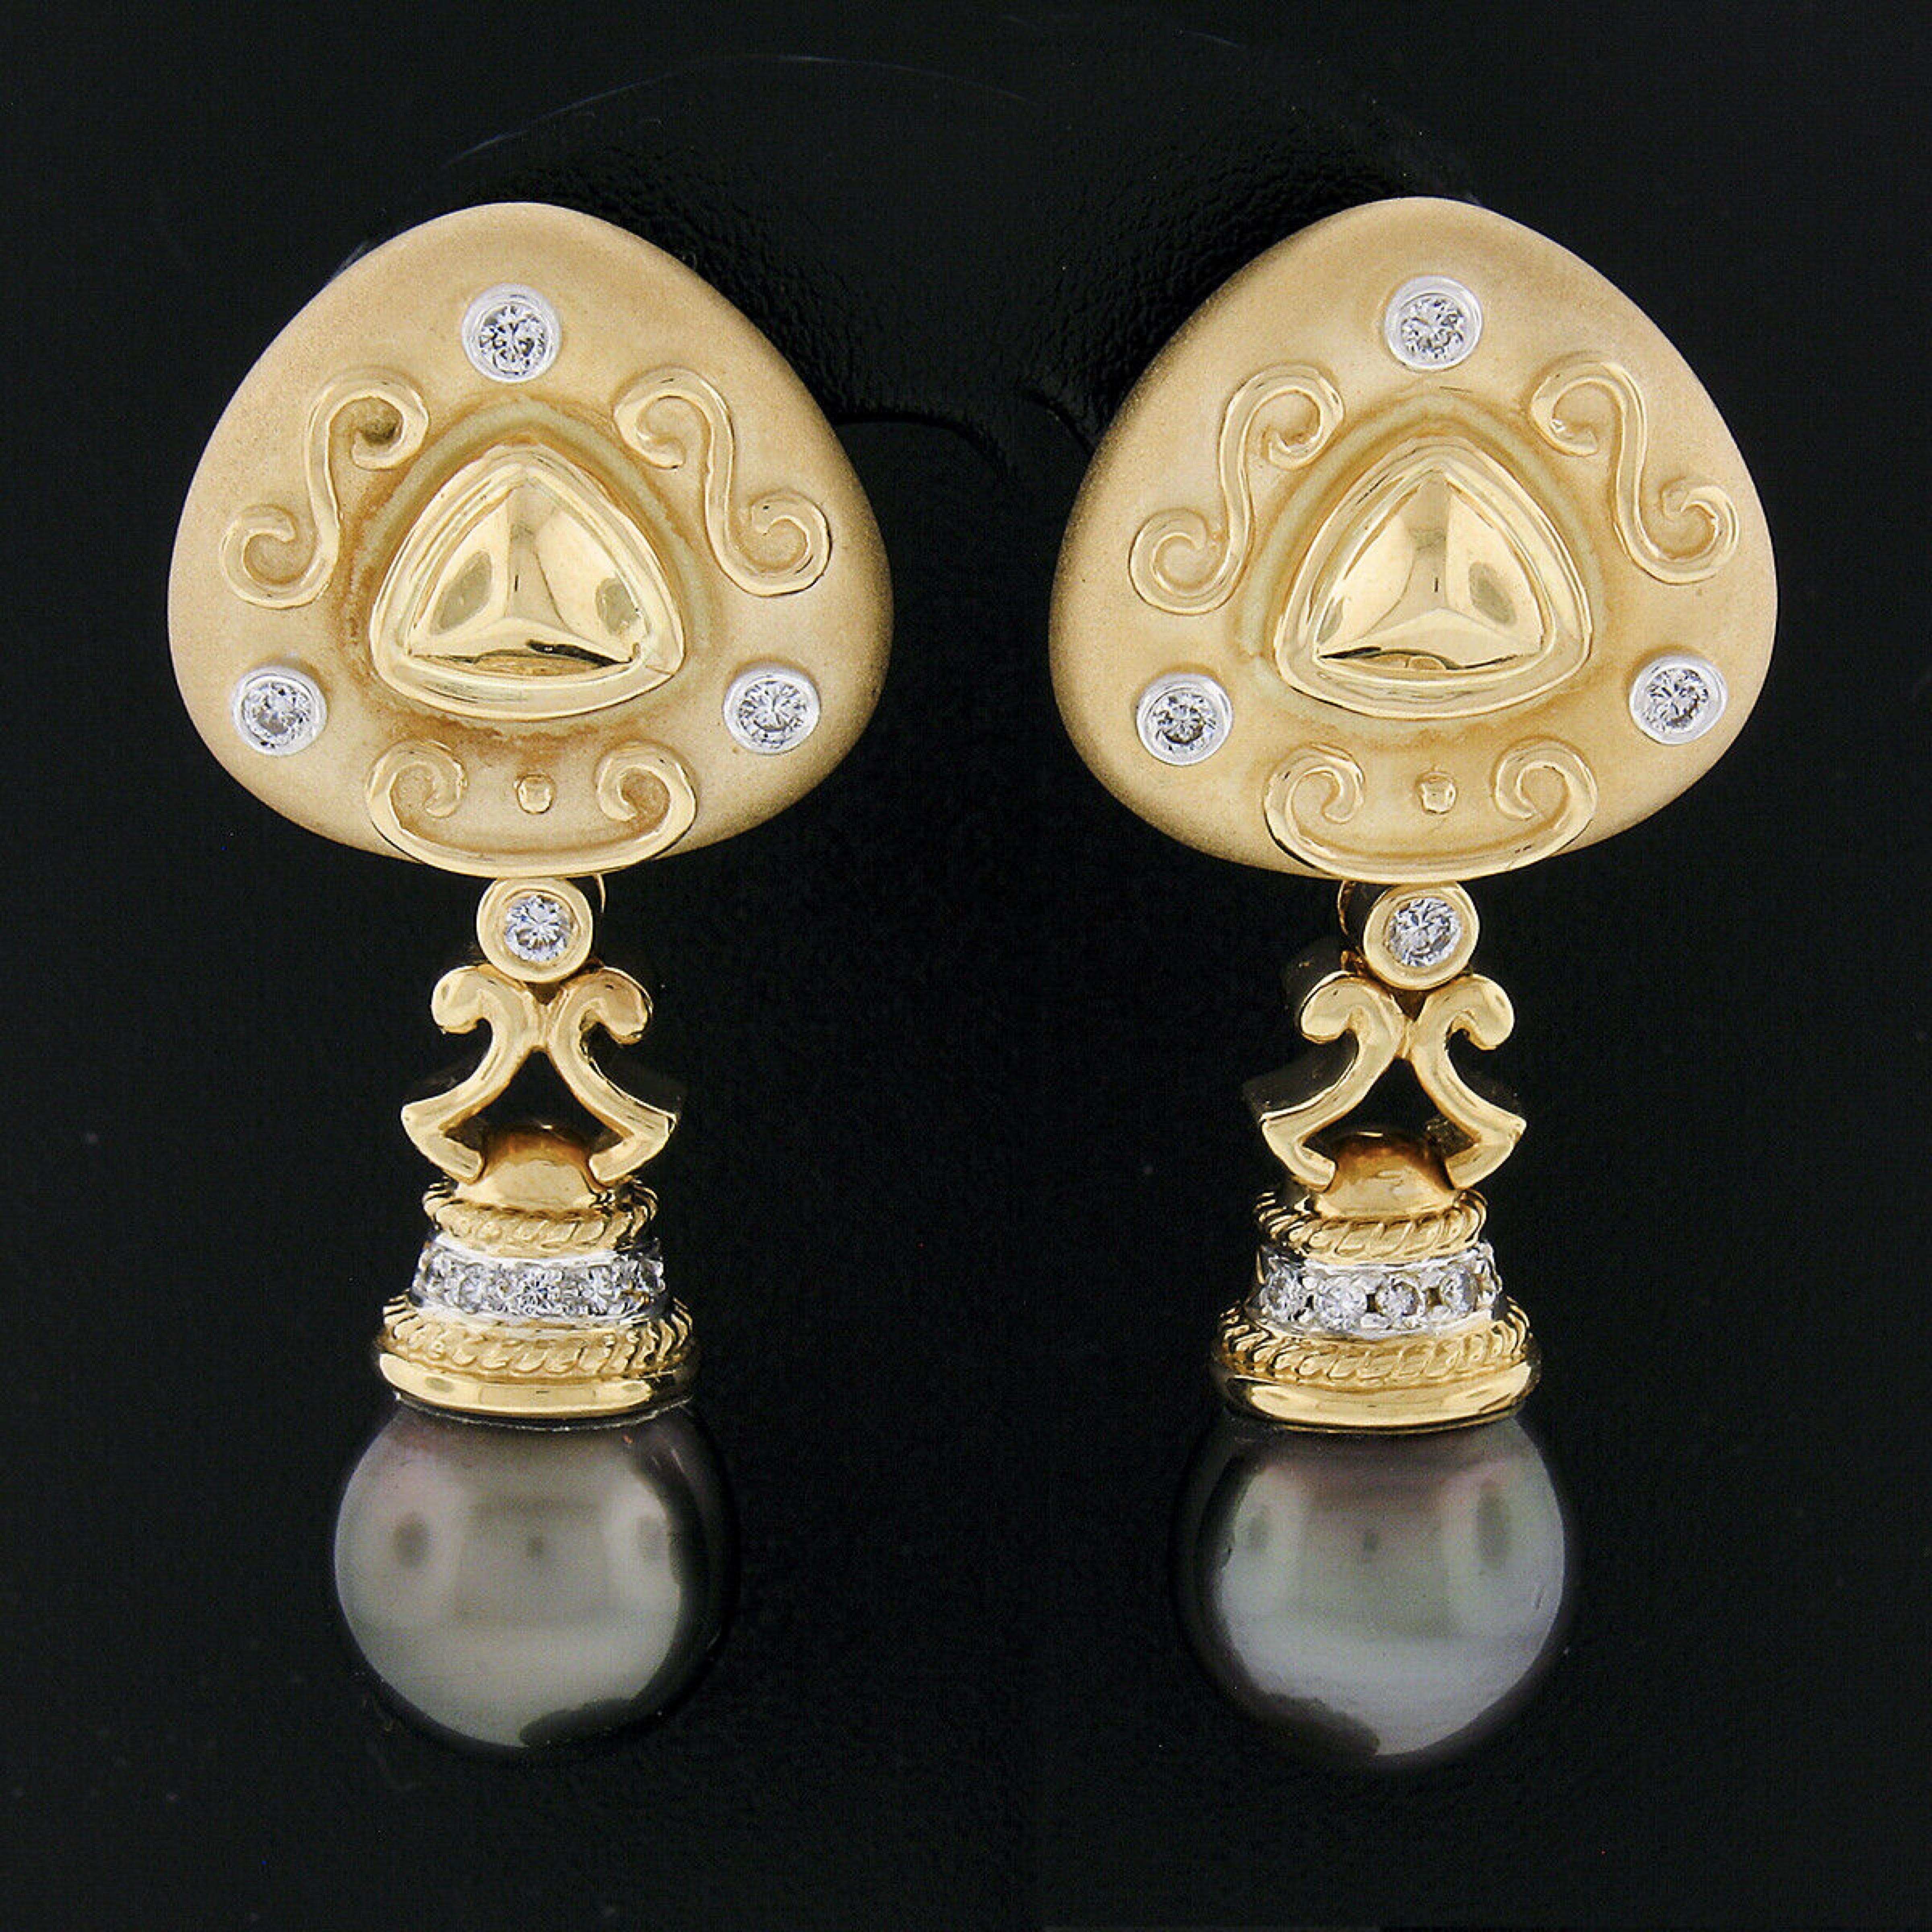 This stunning and truly unique pair of estate diamond and pearl enhancer earrings is crafted in solid 18k yellow gold and features an absolutely elegant design. The top portion displays wonderful matte finish with nice high polished finish detailing